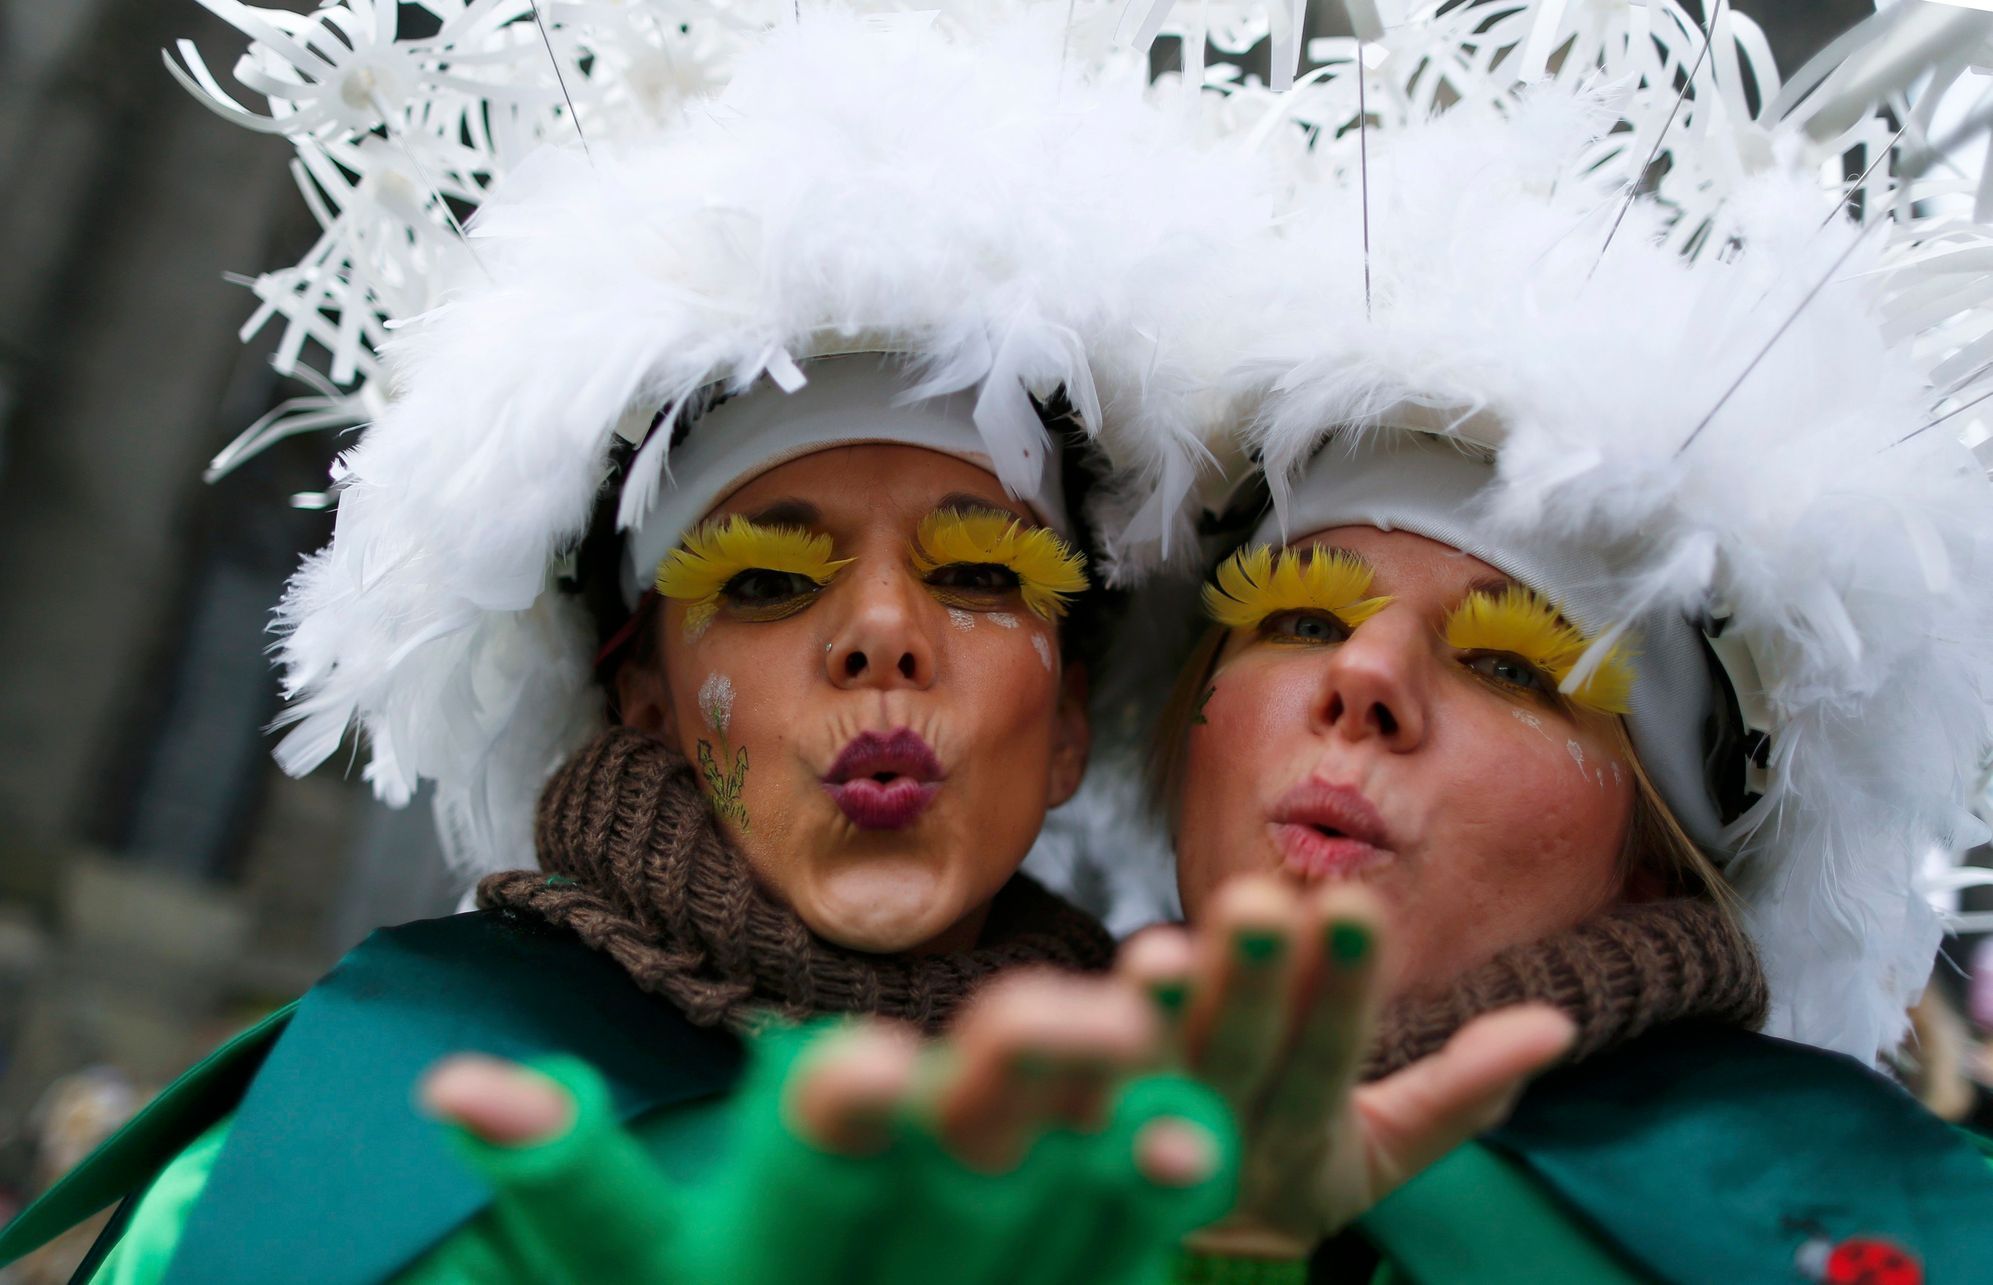 Women dressed in costumes celebrate during &quot;Weiberfastnacht&quot; (Women's Carnival)) in Cologne